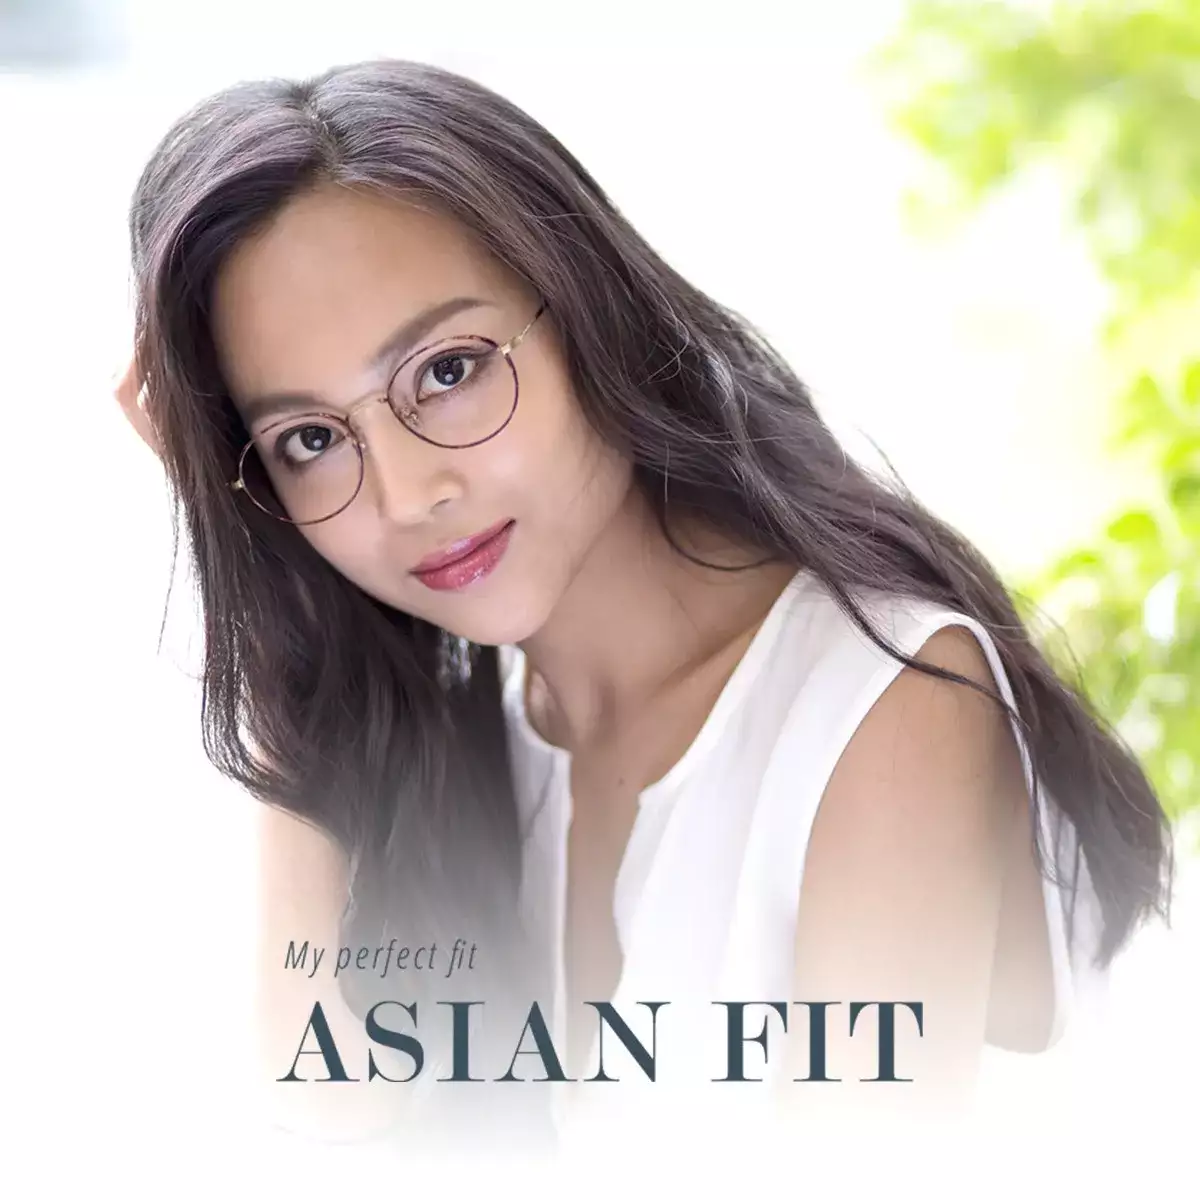 ABOUT ASIAN FIT